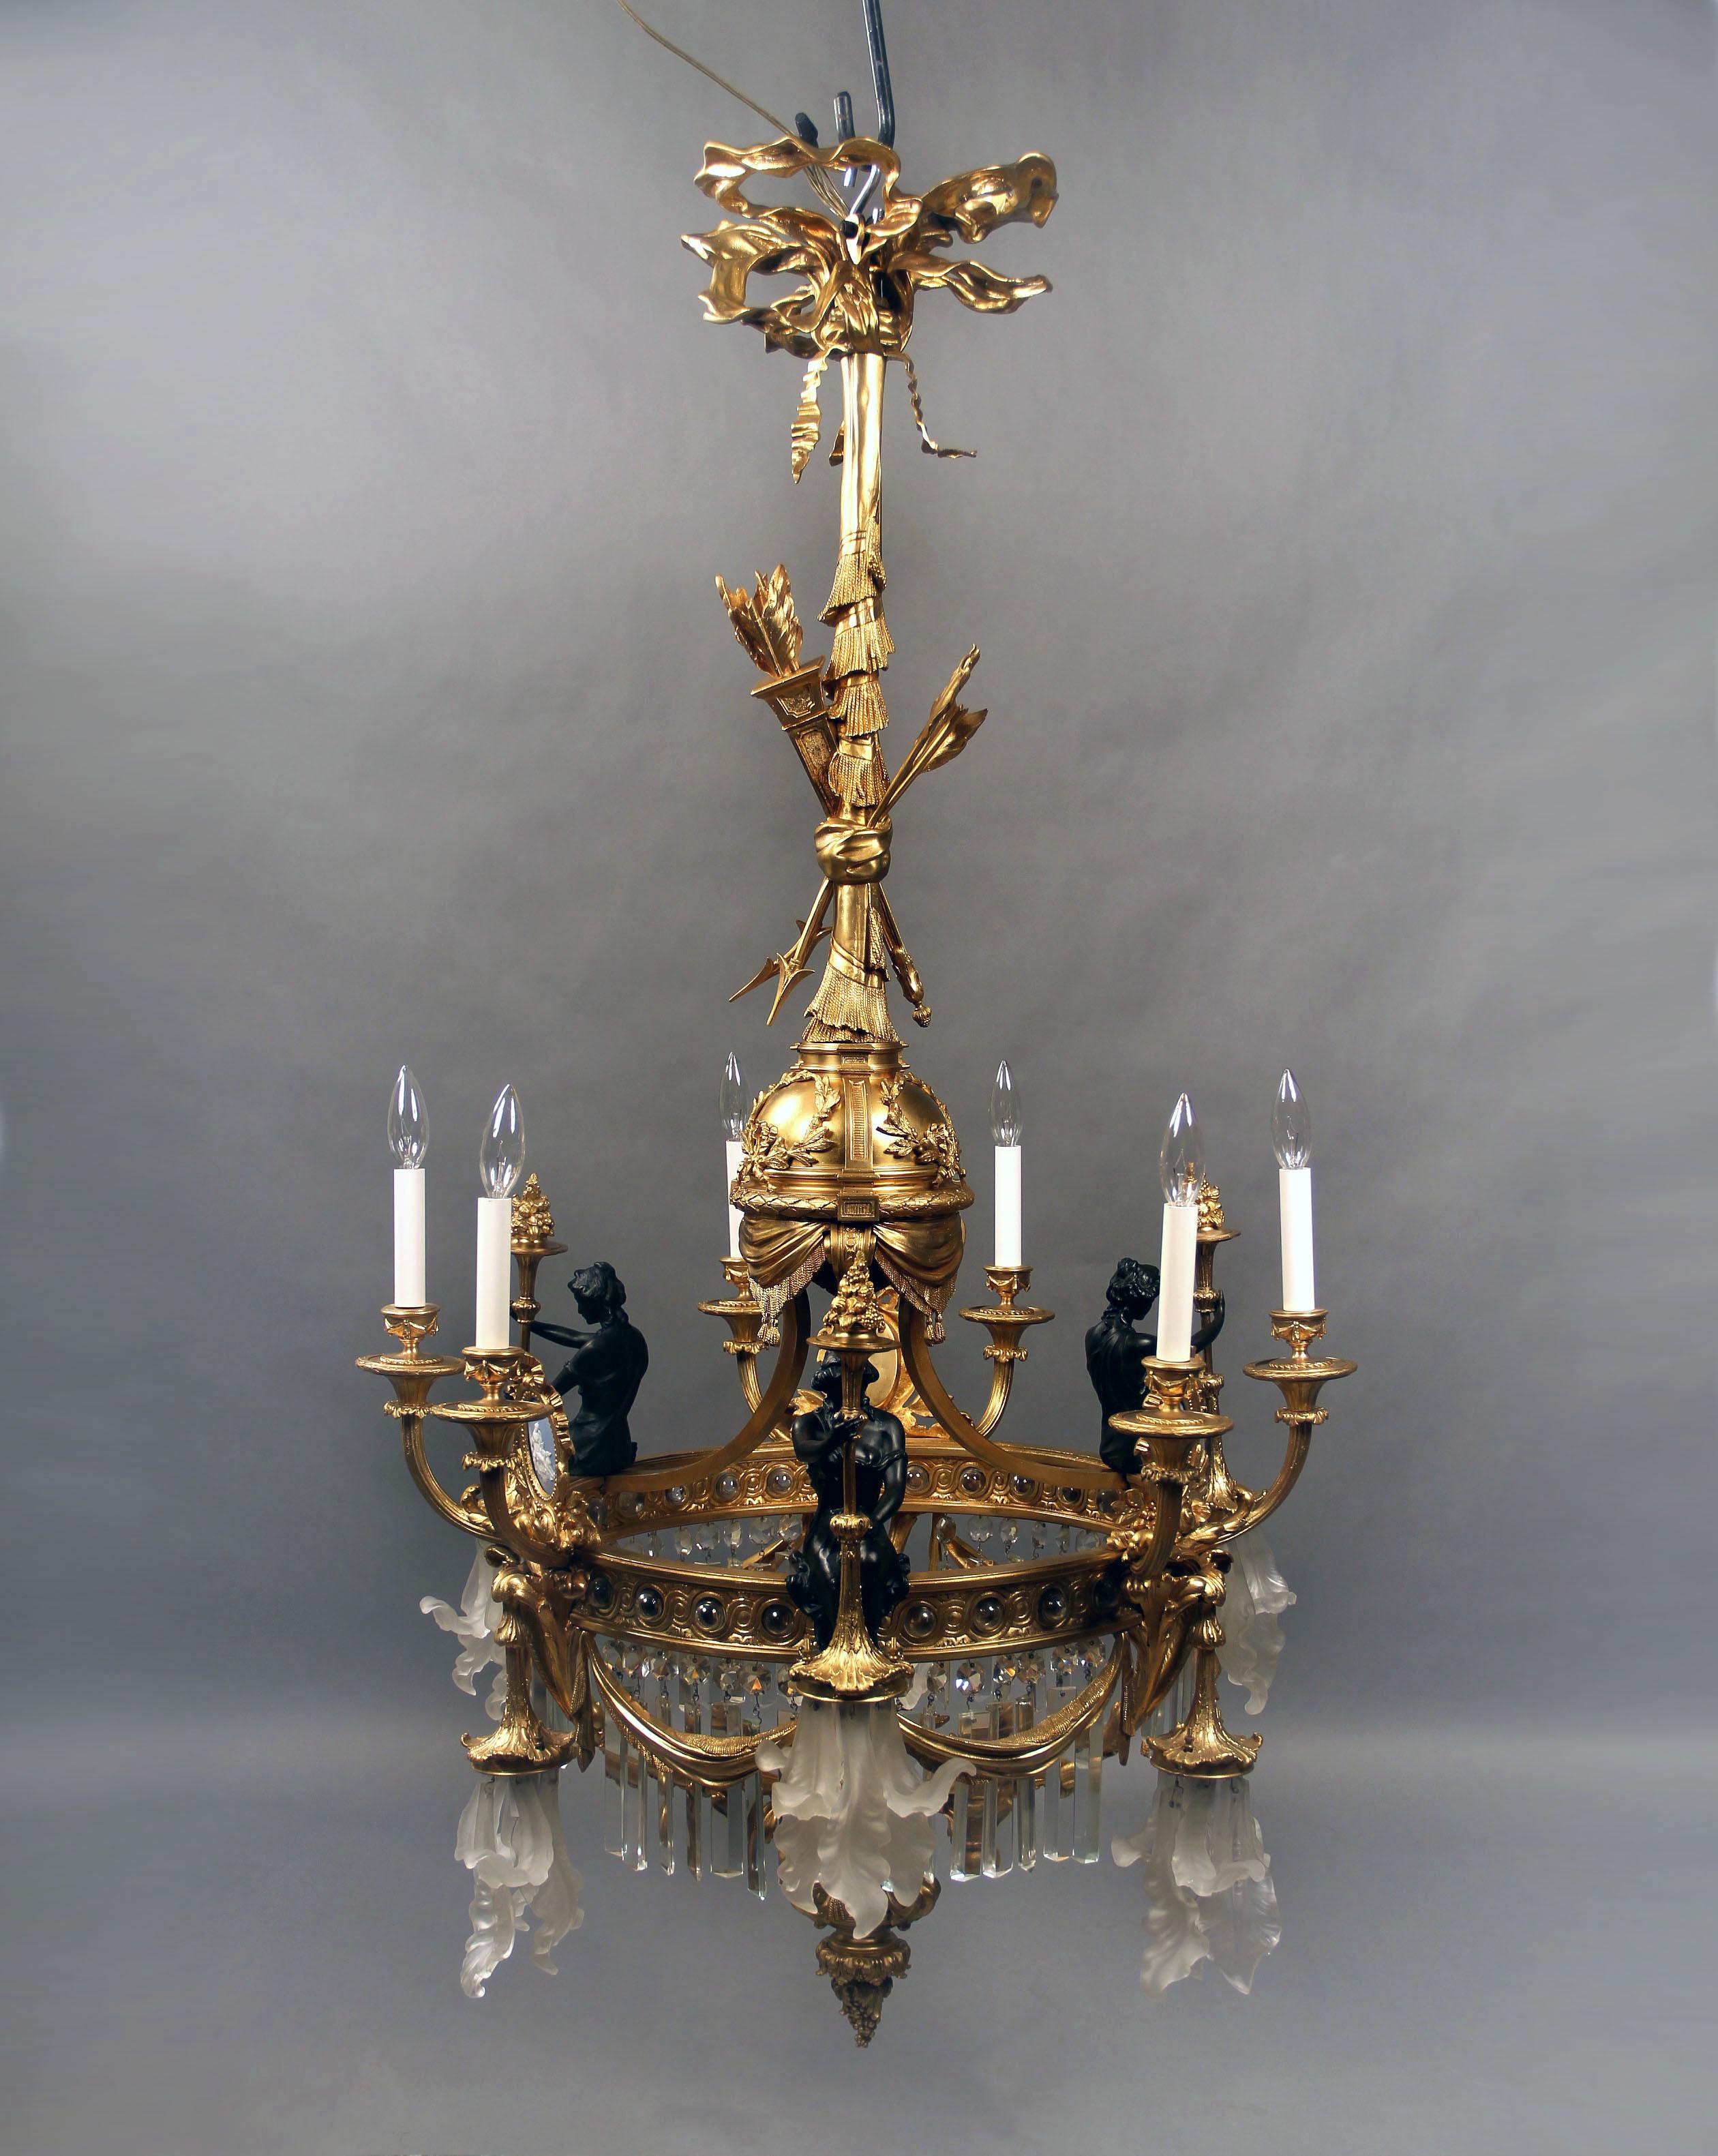 A unique late 19th-early 20th century gilt and patina bronze, crystal and wedgwood porcelain thirteen-light chandelier.

Three scantily clad dressed maidens sit atop the perimeter of the chandelier, centered by three Wedgwood plaques. The top